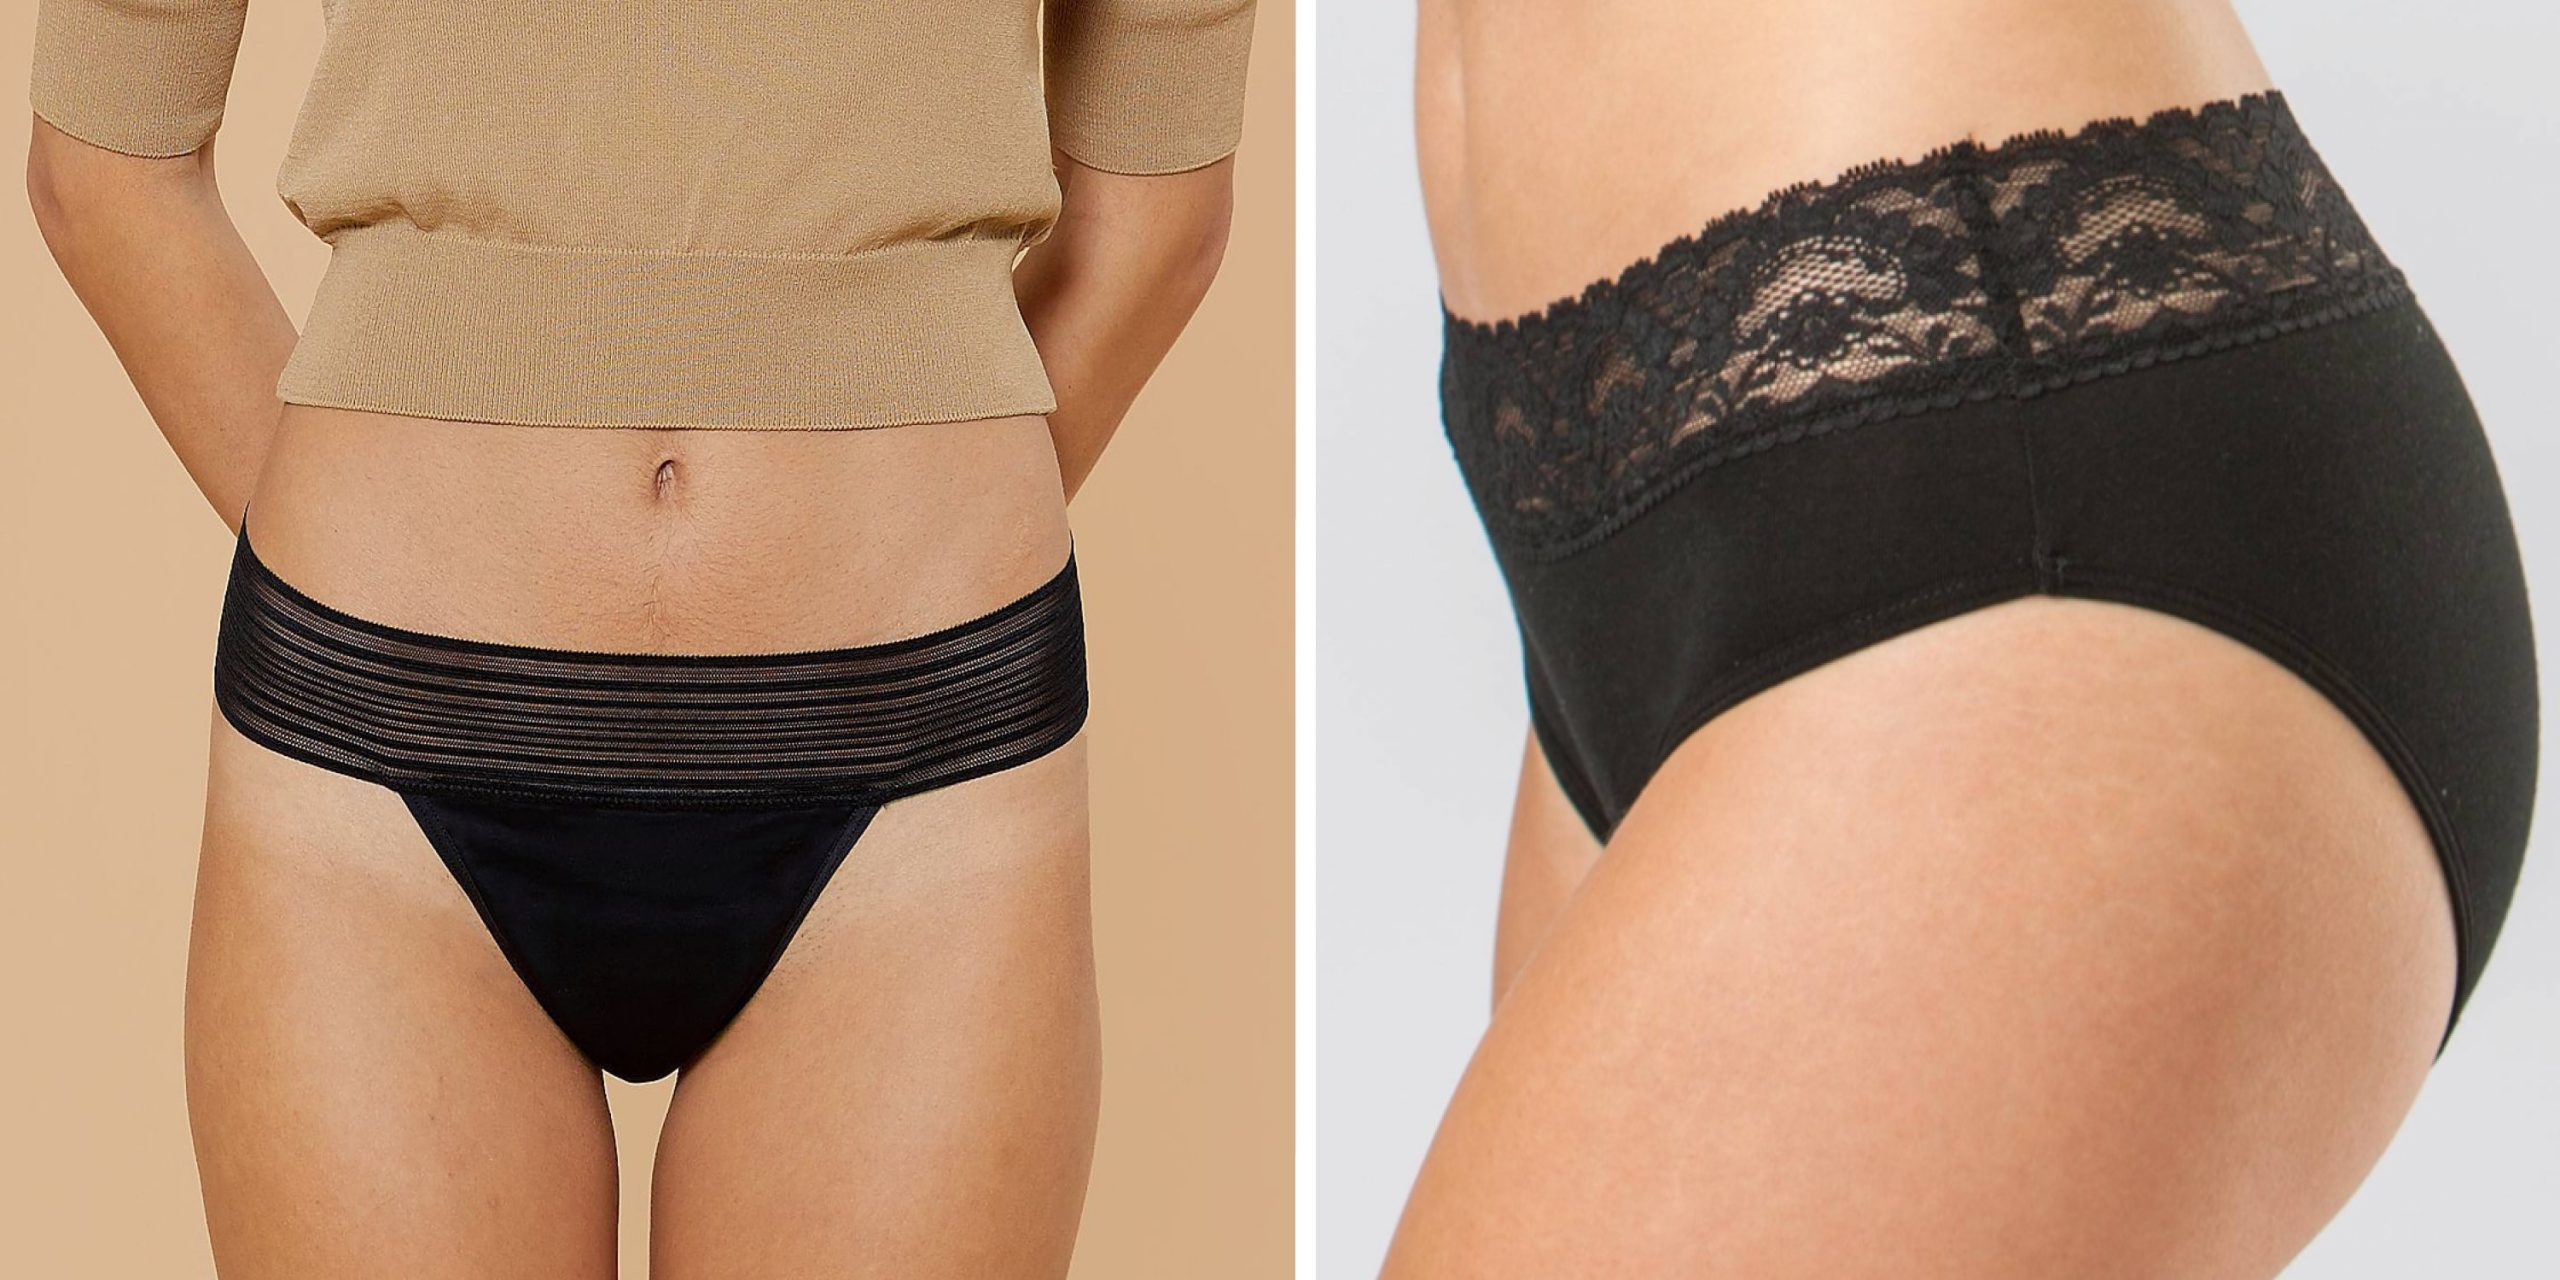 How To Get Period Blood Out Of Your Underwear